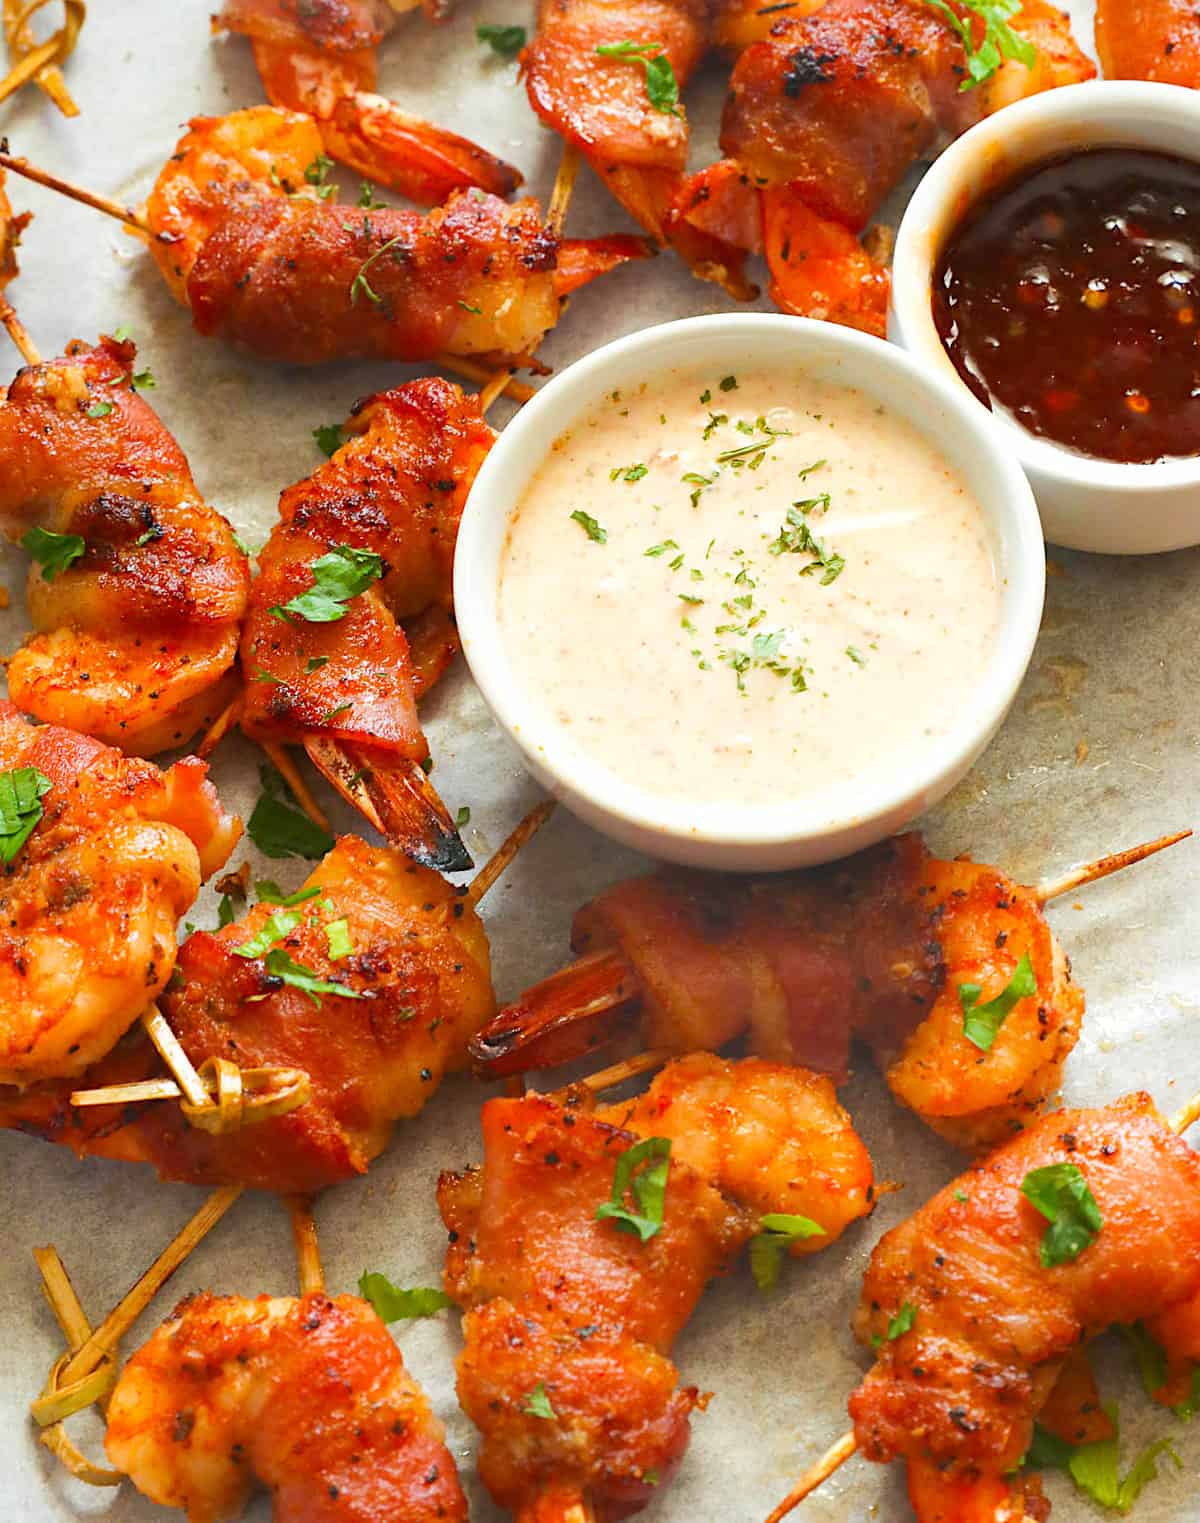 Bacon-wrapped shrimp is the perfect dish for both meat and seafood lovers